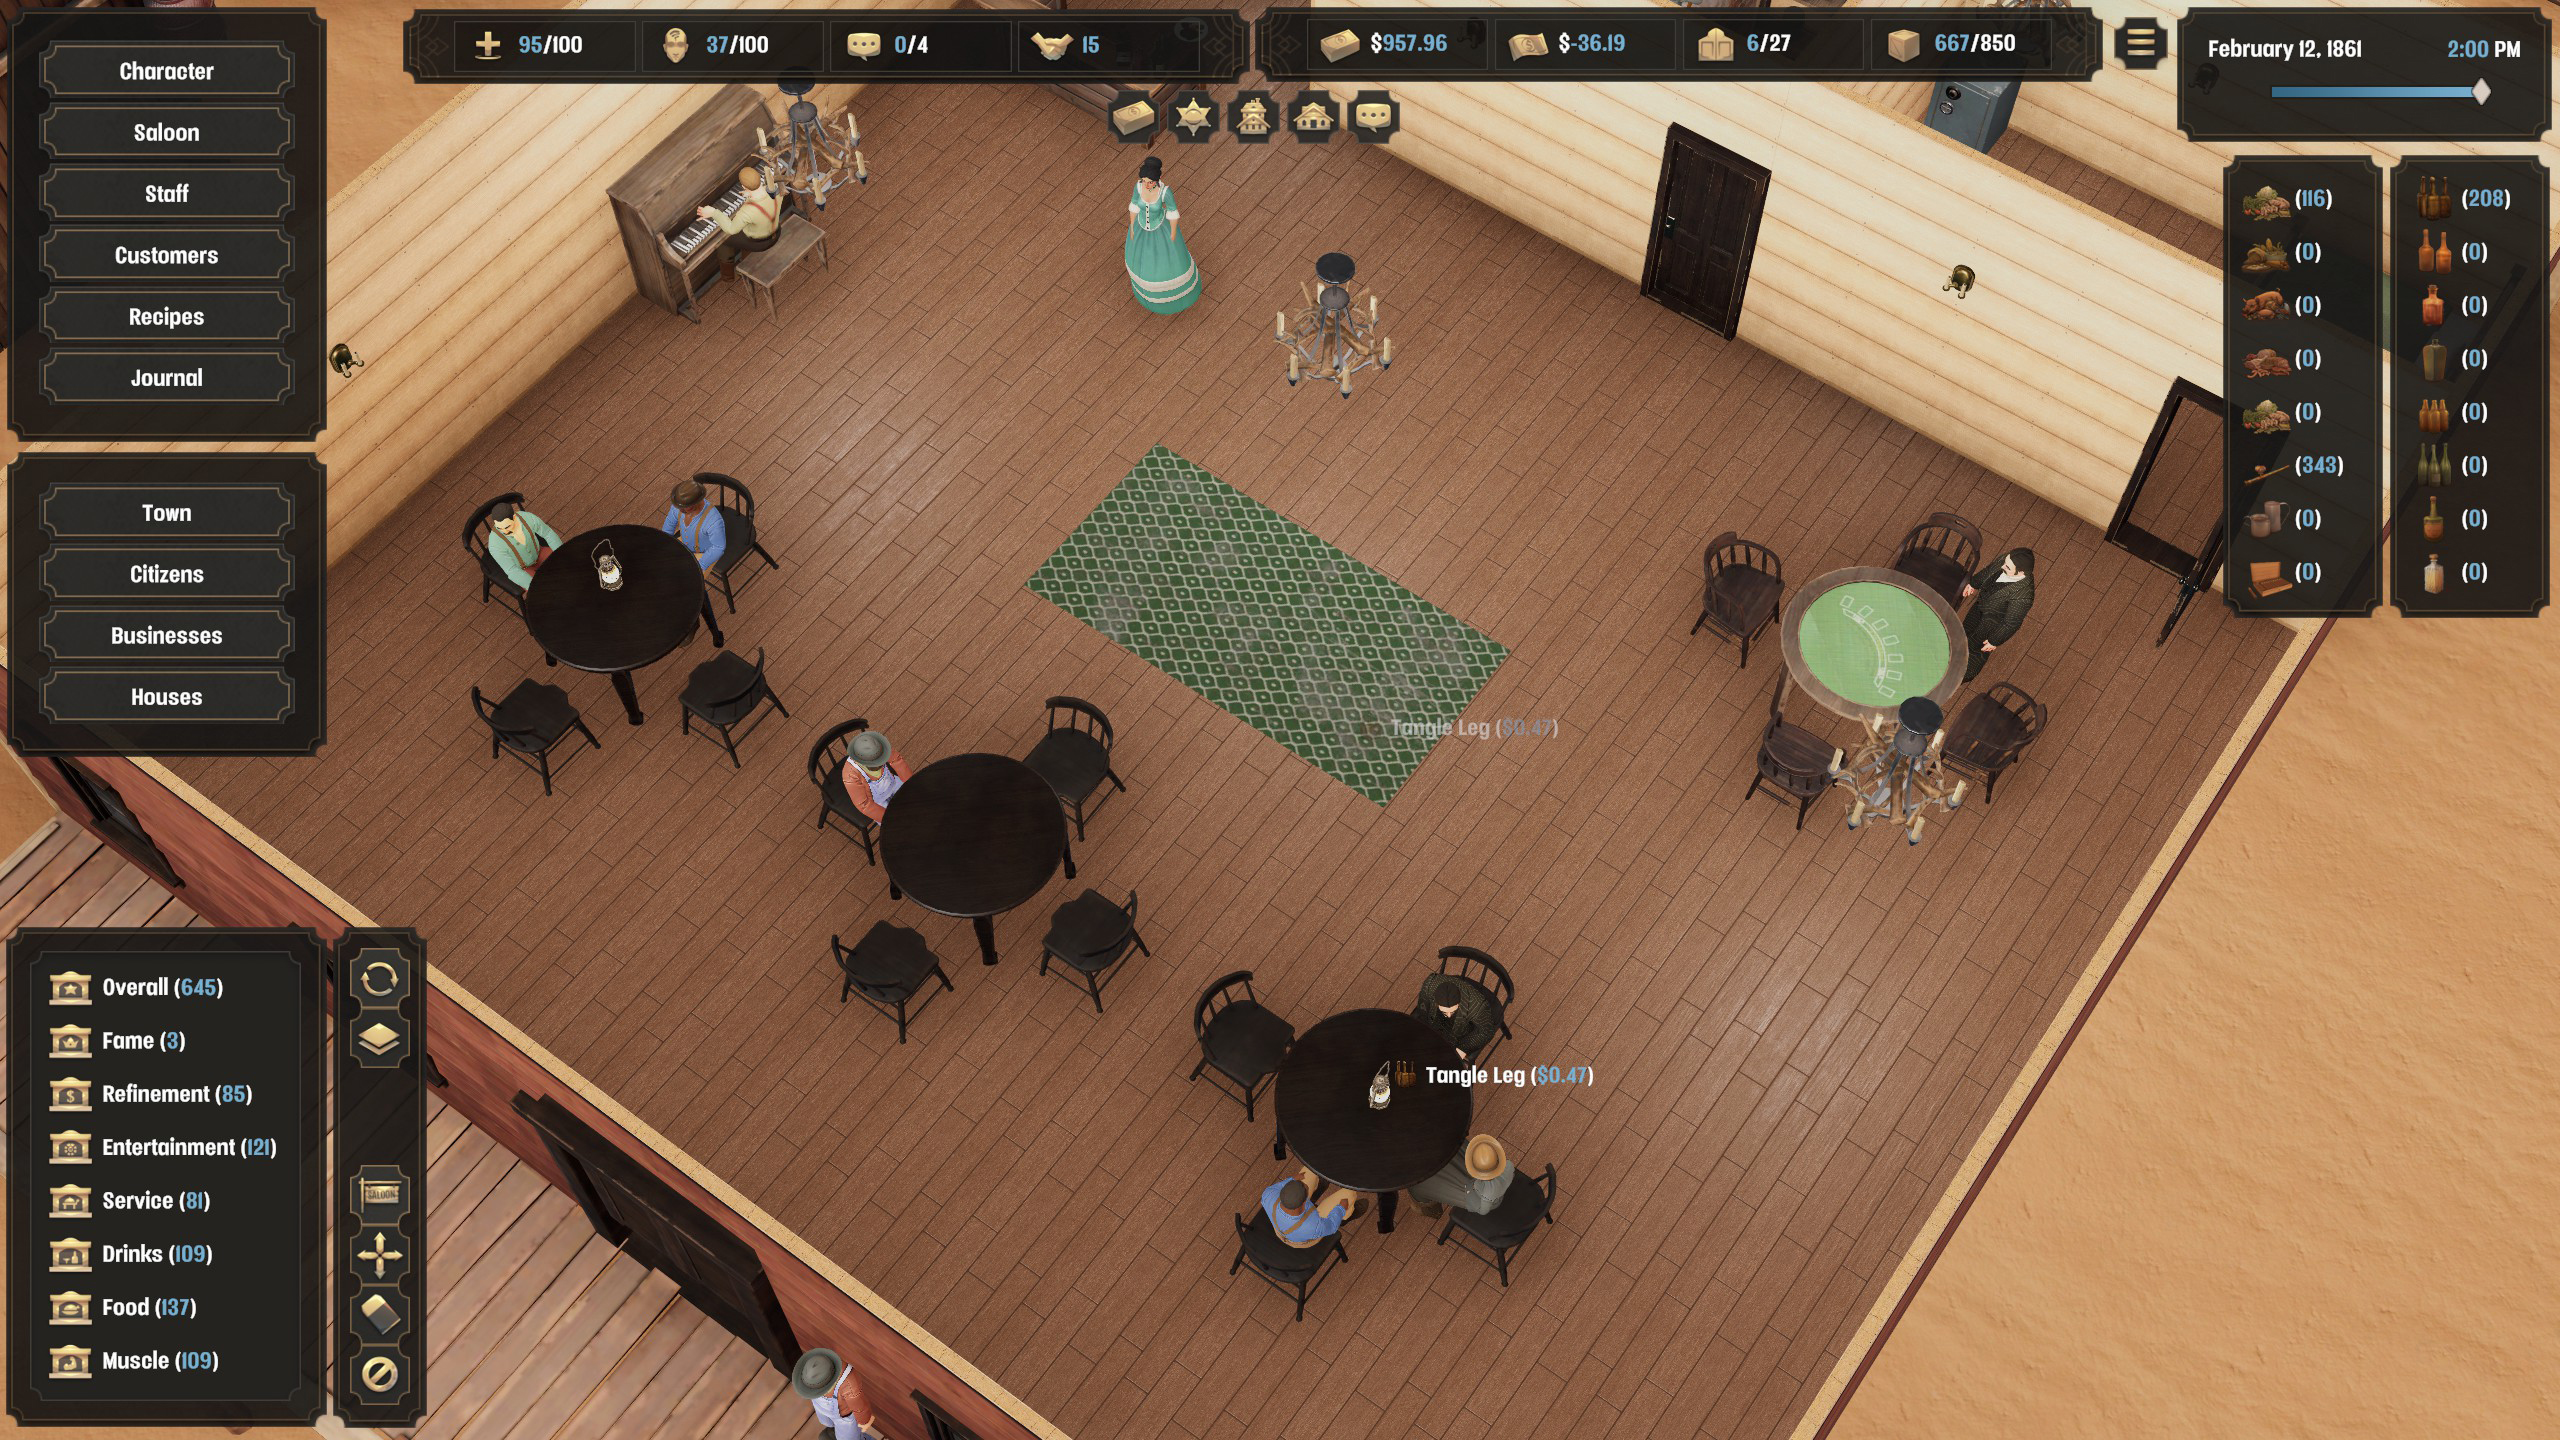 I’m shocked how quickly I became a murderous opium addict in this saloon management sim